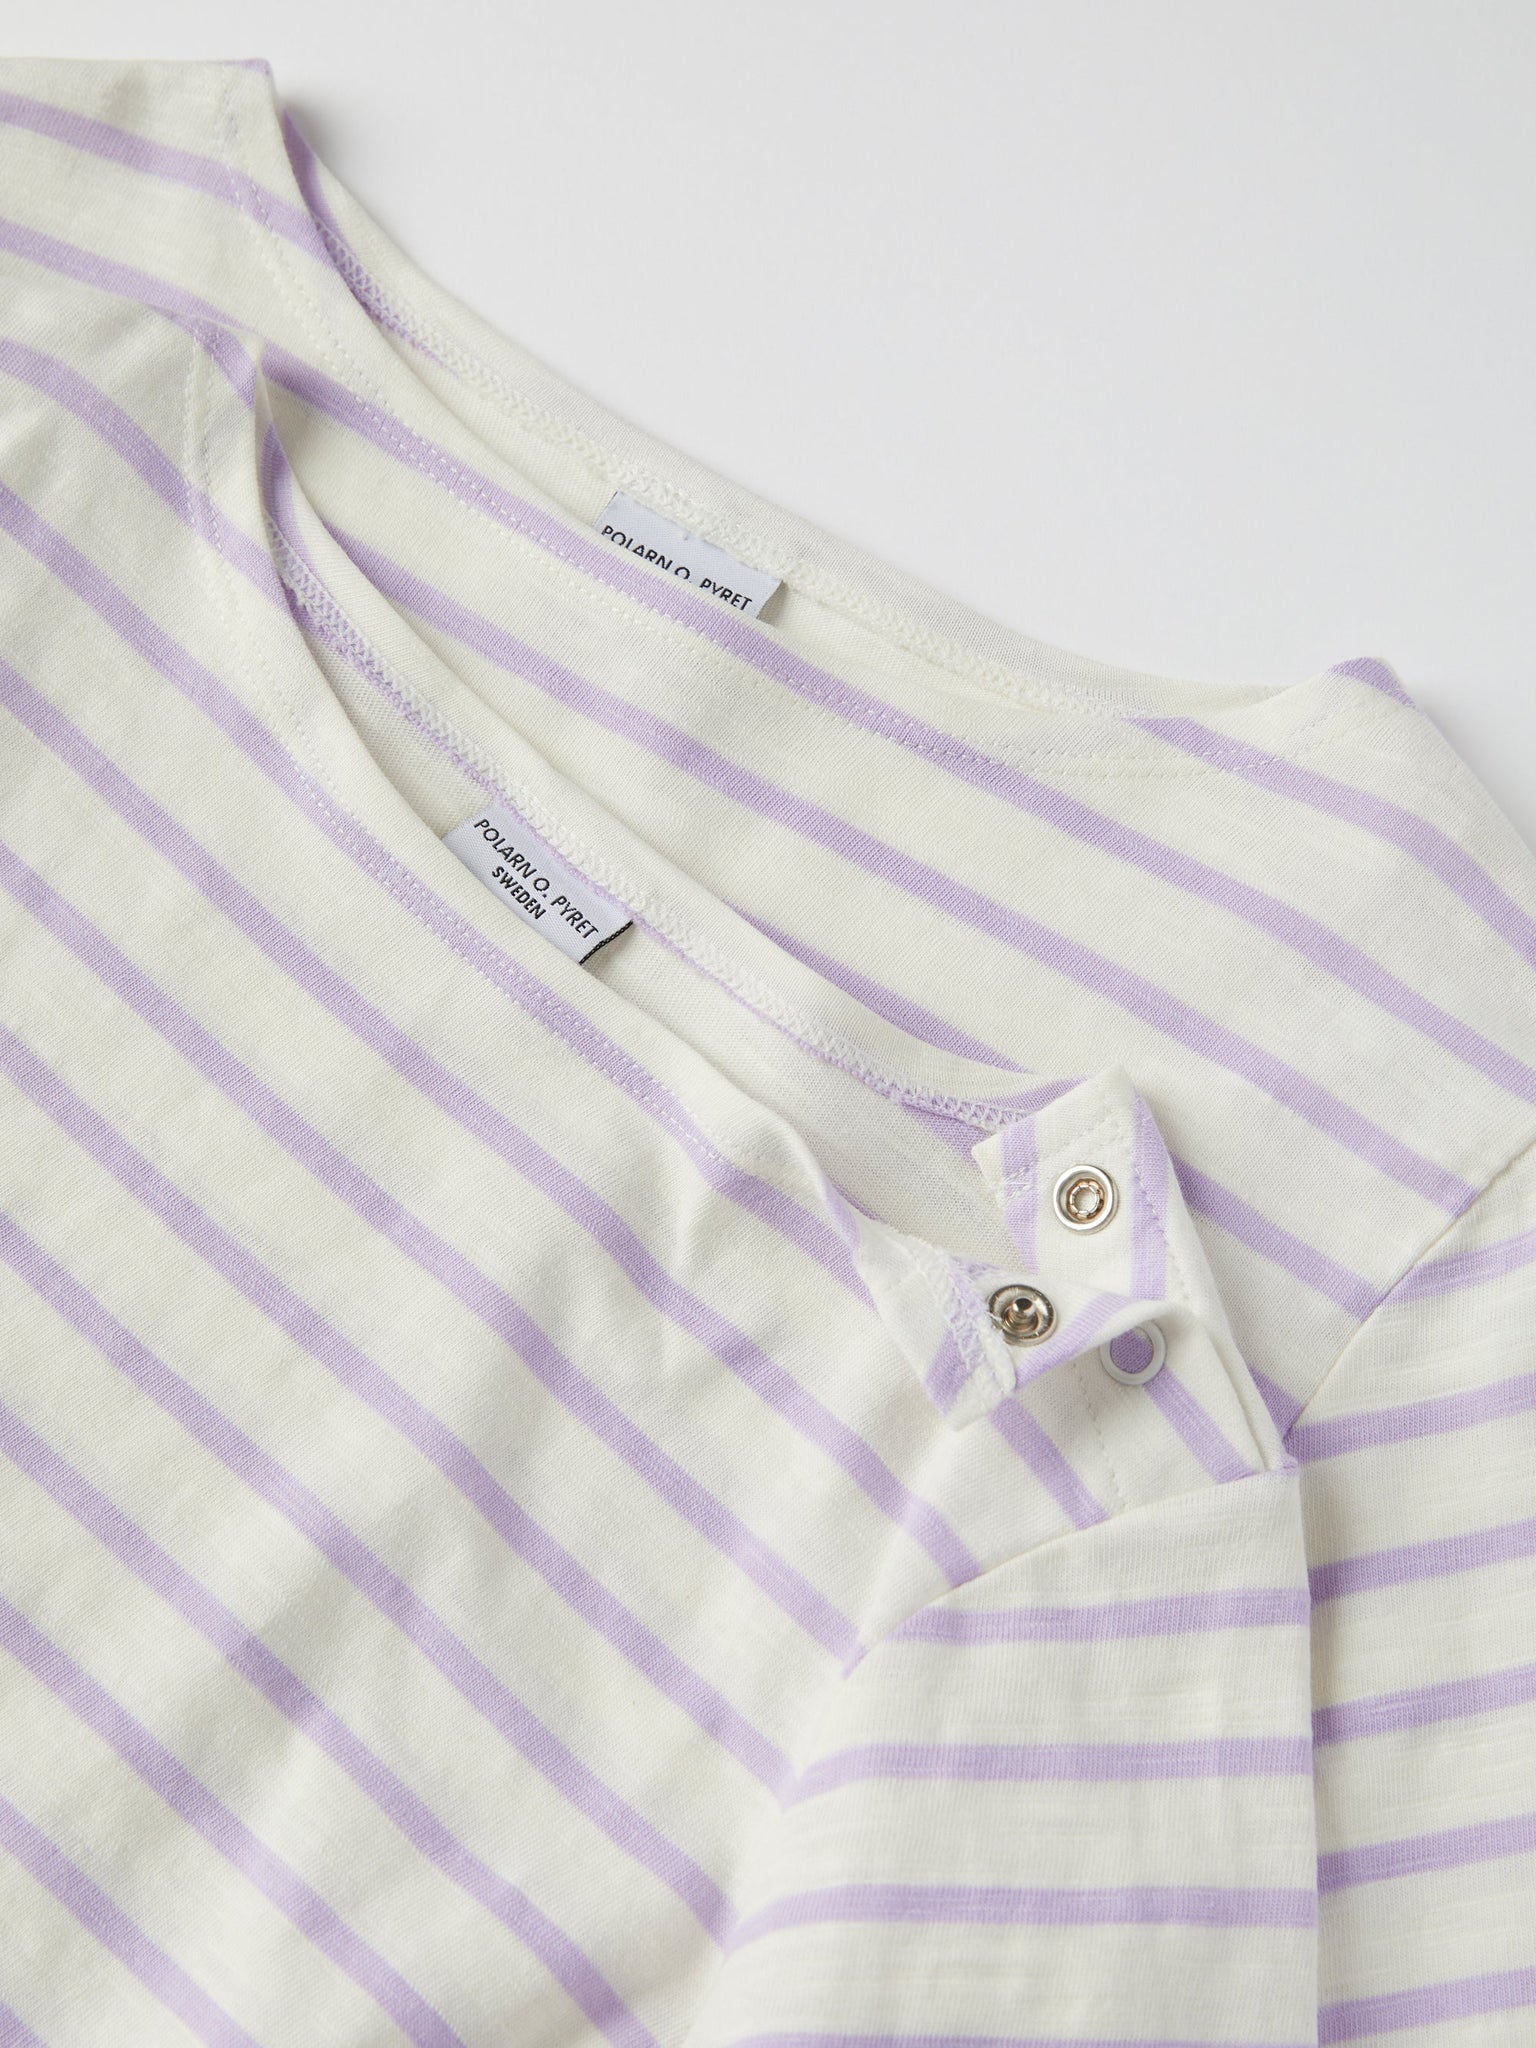 Lilac Breton Stipe Kids Top from the Polarn O. Pyret kidswear collection. Nordic kids clothes made from sustainable sources.